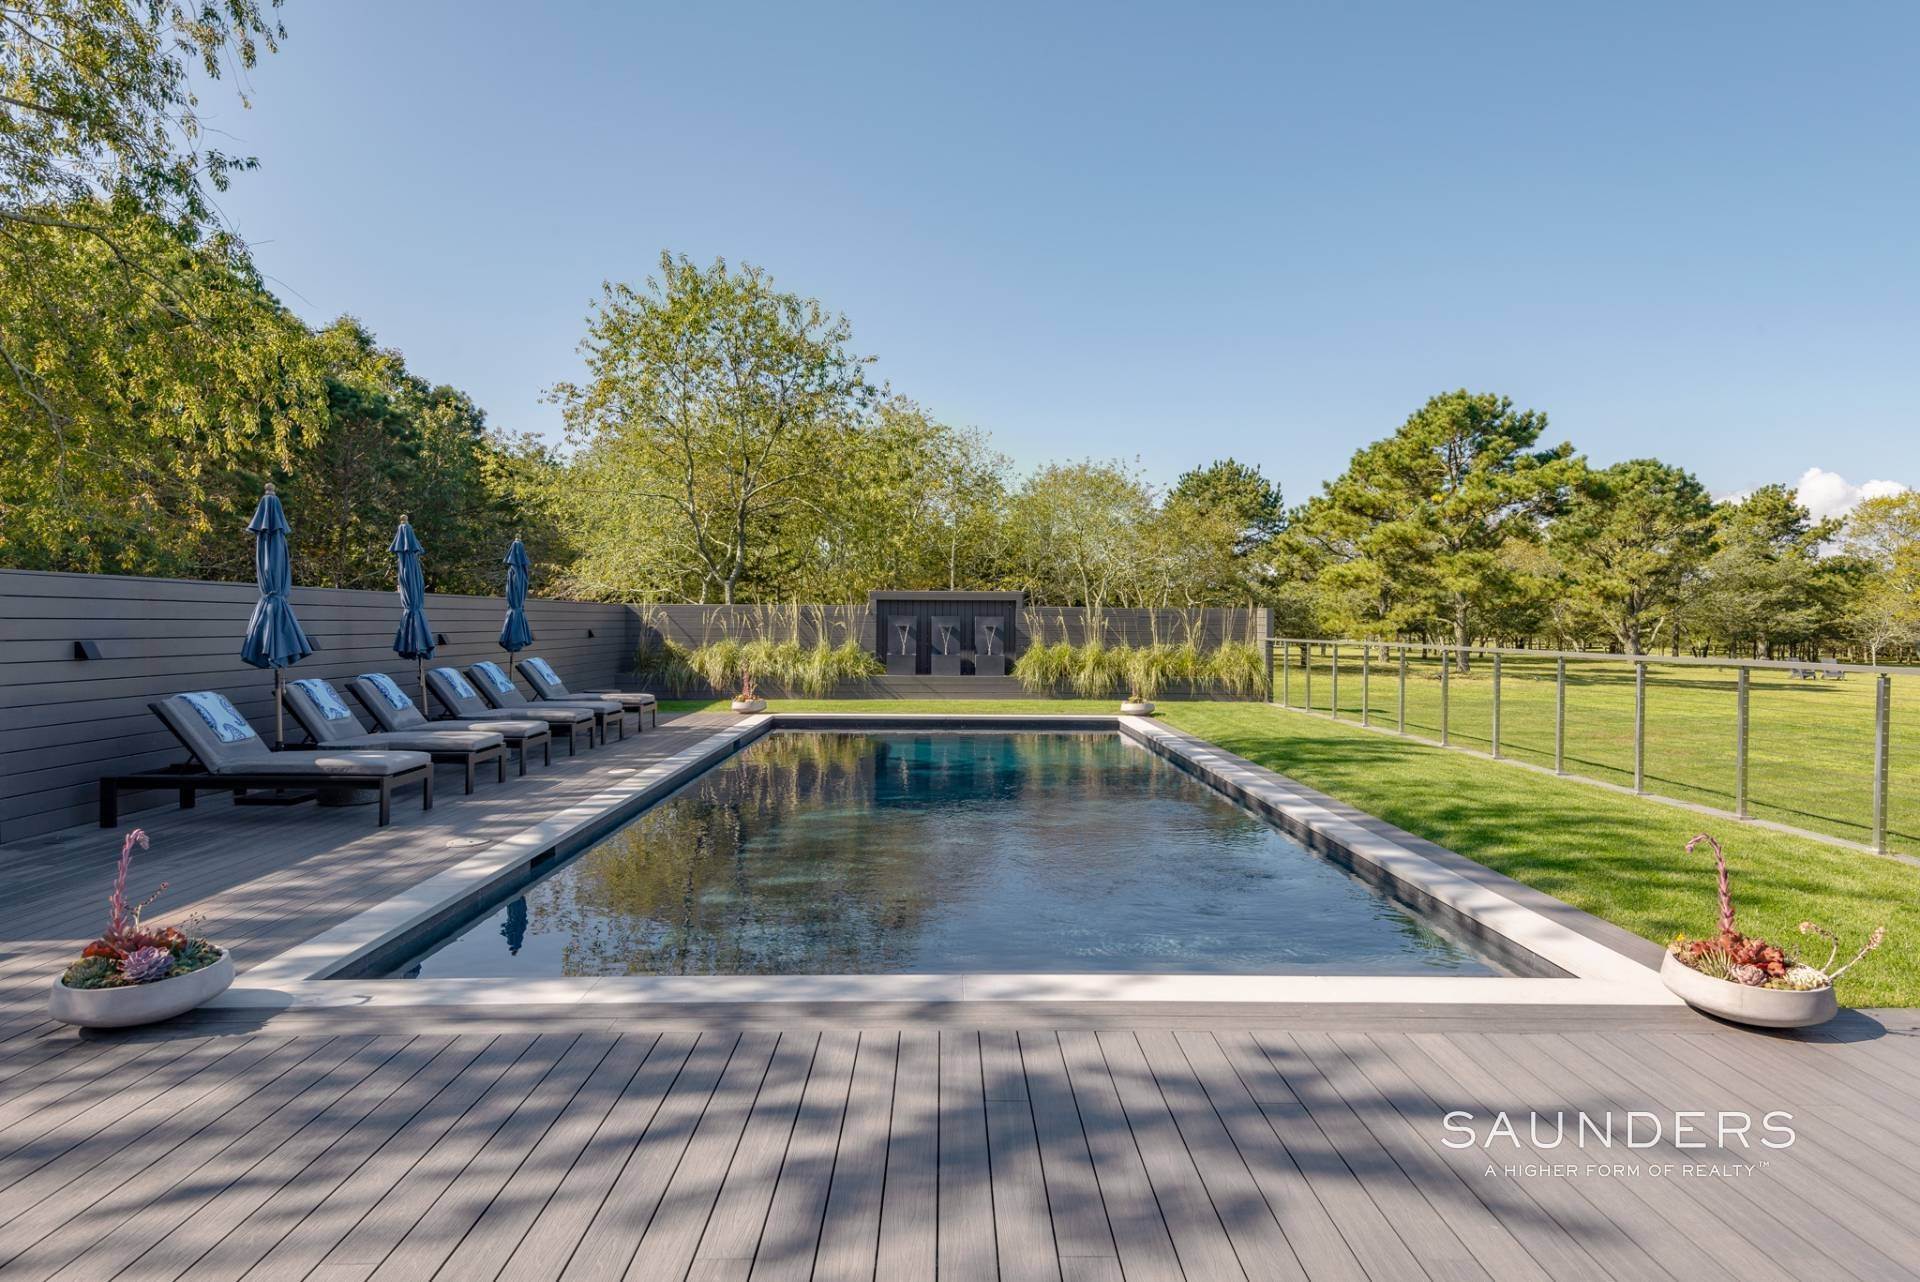 Single Family Homes at 6 Acres + 2 Houses + Pool = Perfect 64 And 66 Lewis Road, East Quogue, NY 11942